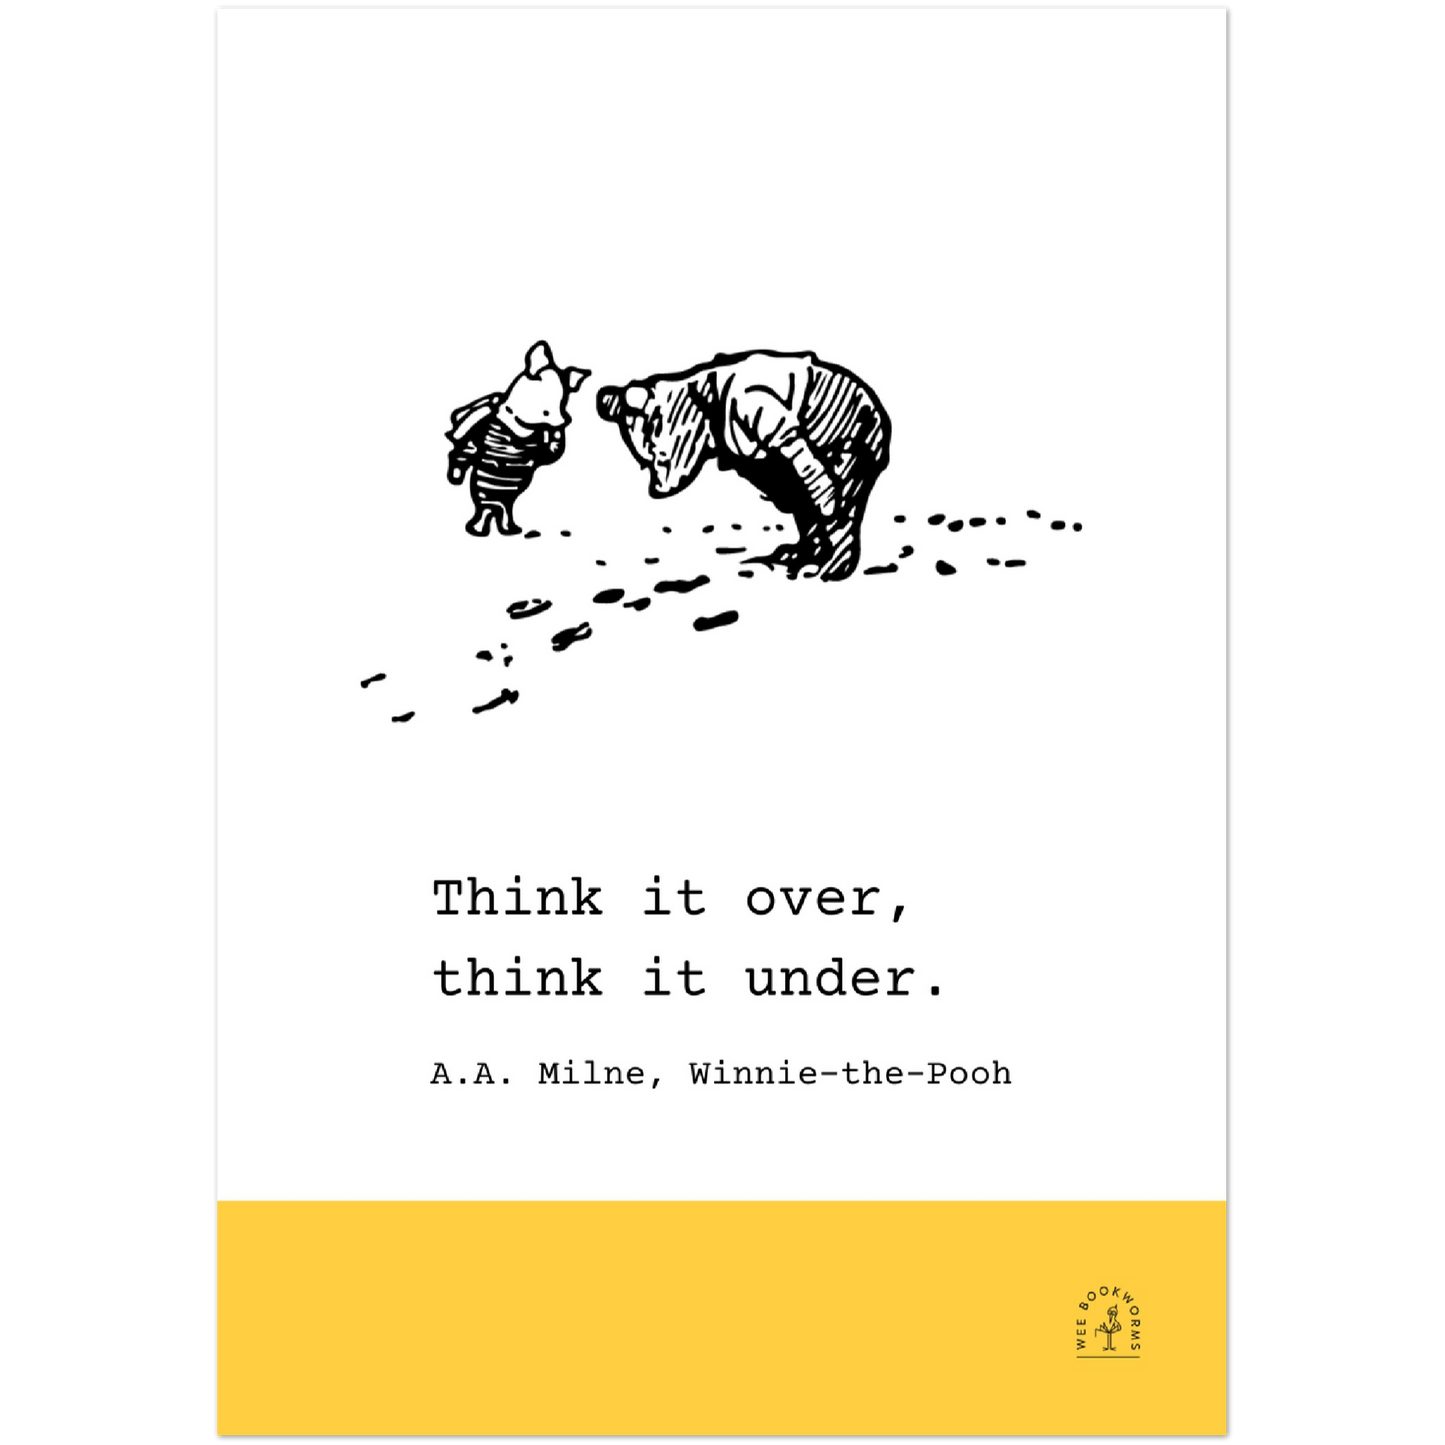 Winnie-the-Pooh Poster - Think